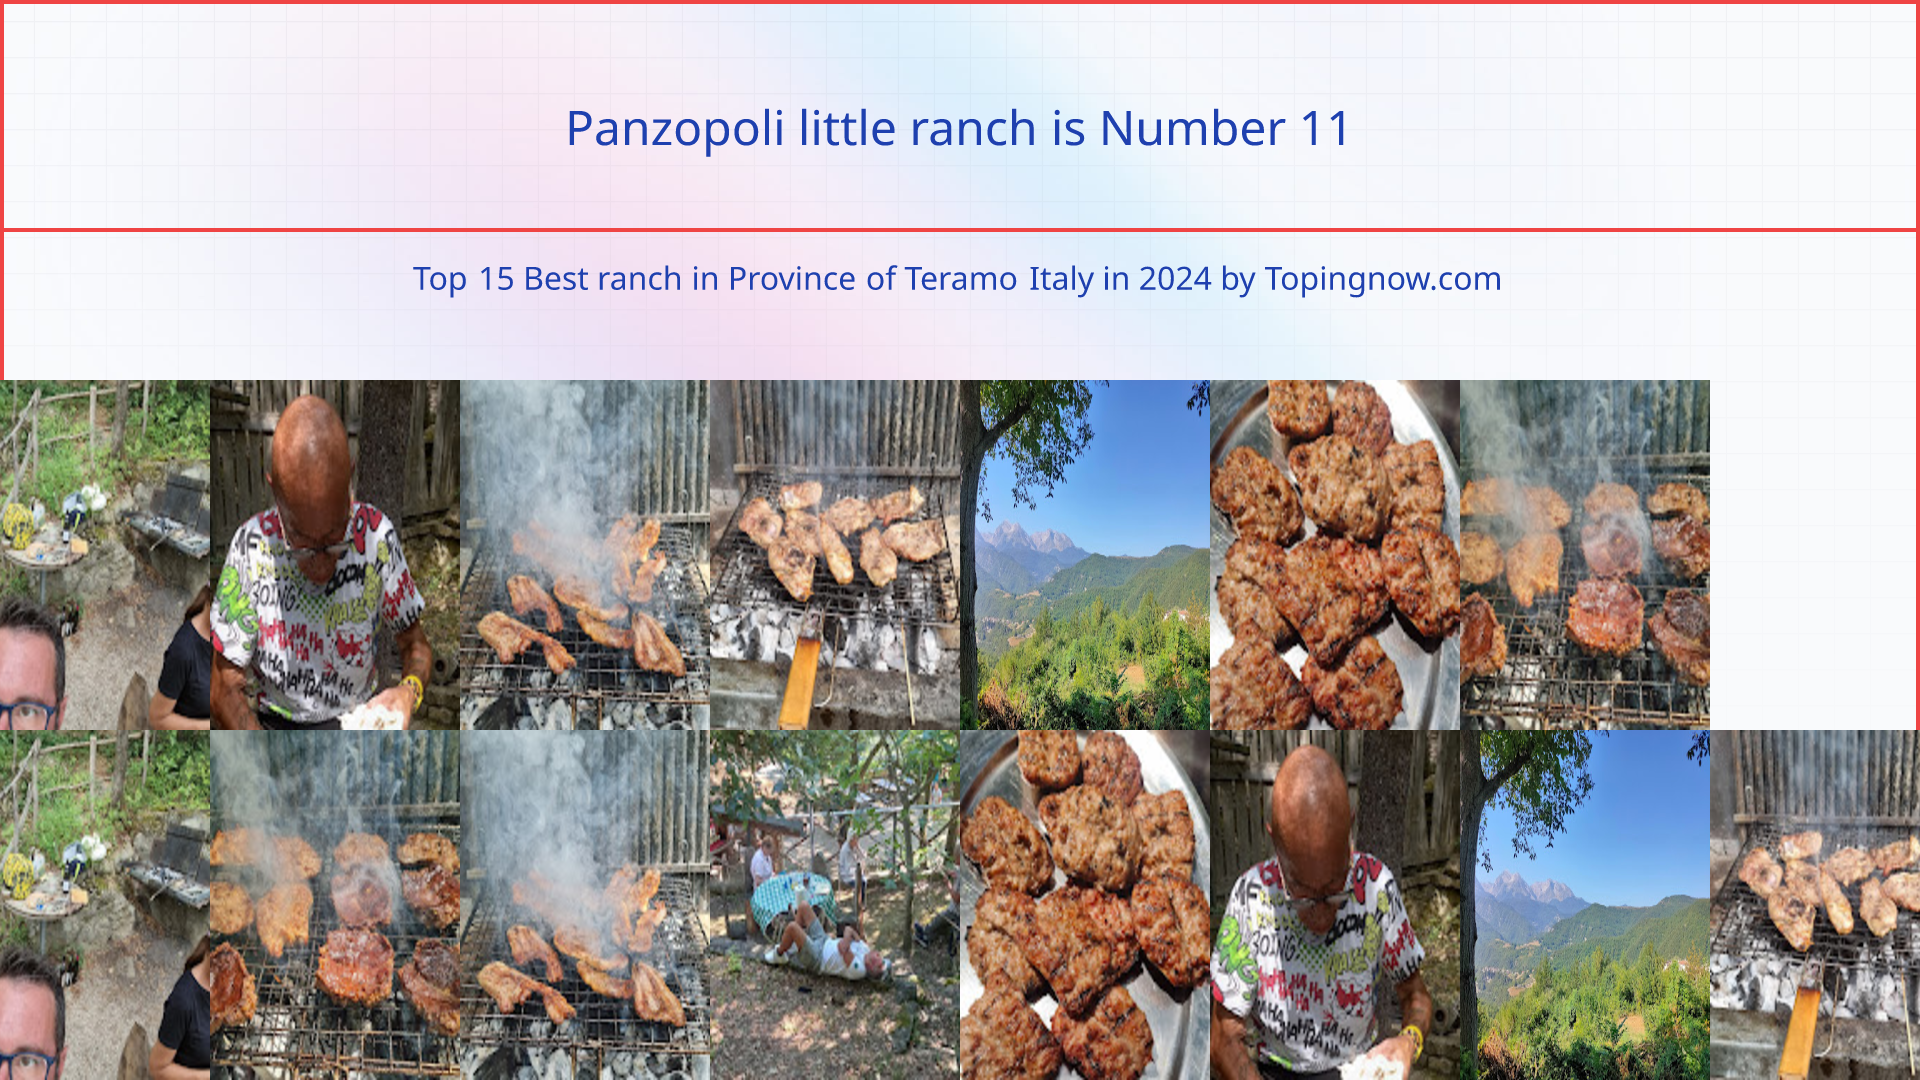 Panzopoli little ranch: Top 15 Best ranch in Province of Teramo Italy in 2024